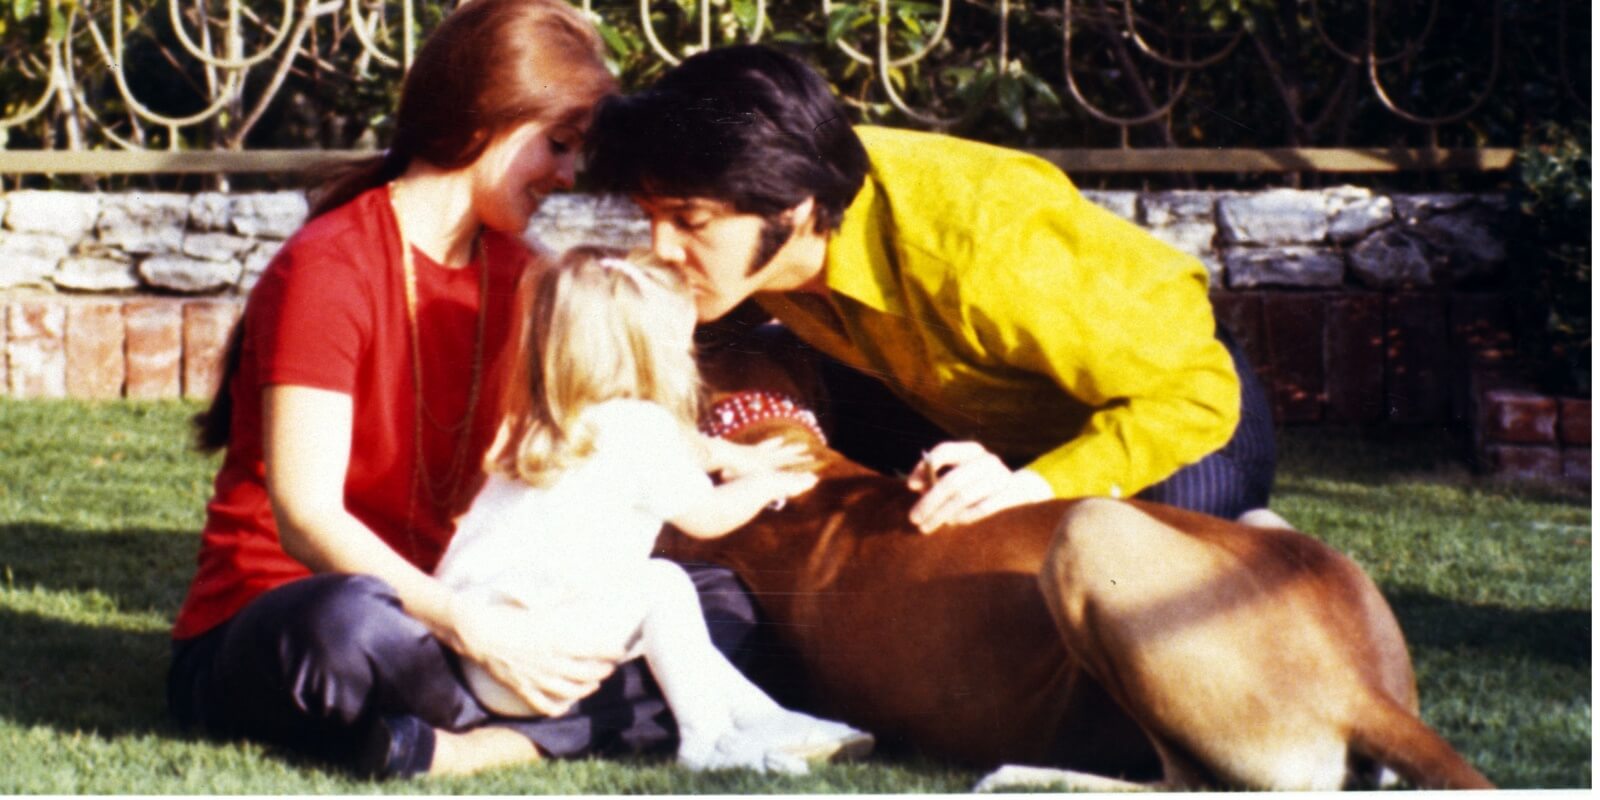 Priscilla Presley, Elvis Presley and Lisa Marie on the grounds of his Graceland estate.